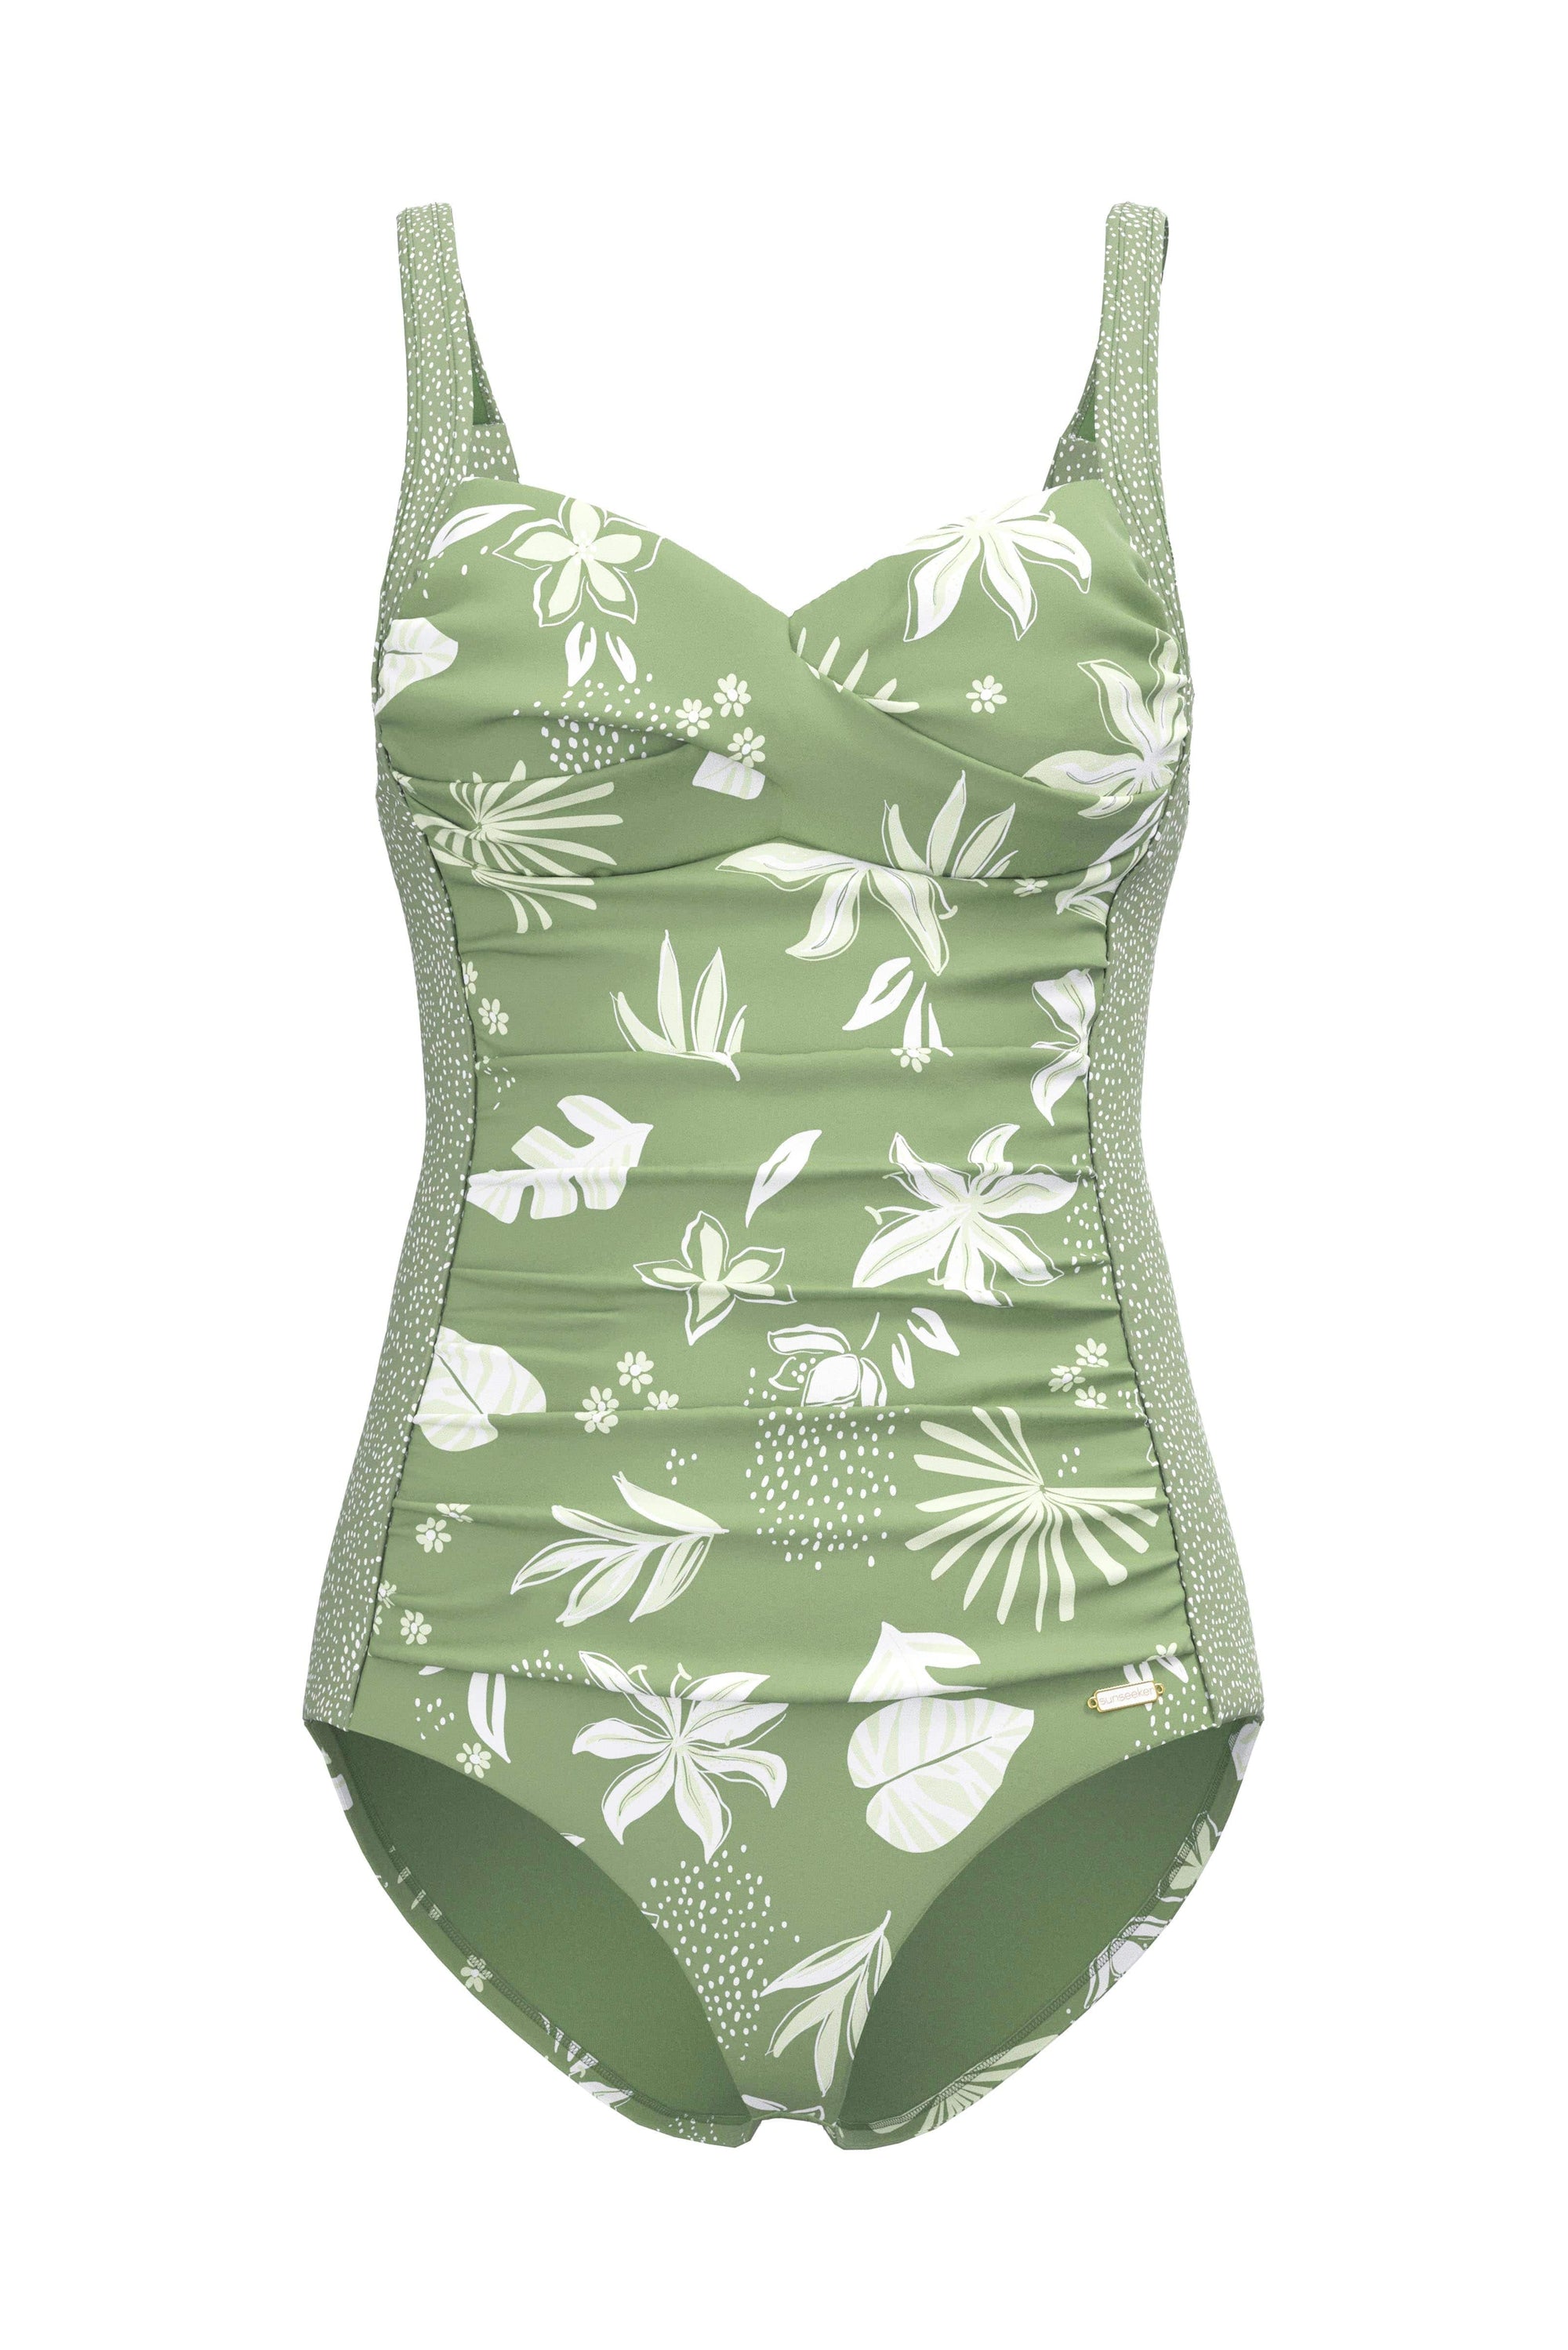 Plus Cup Onepiece South Pacific Palm Moss Plus Cup Twist Front One Piece - Sunseeker